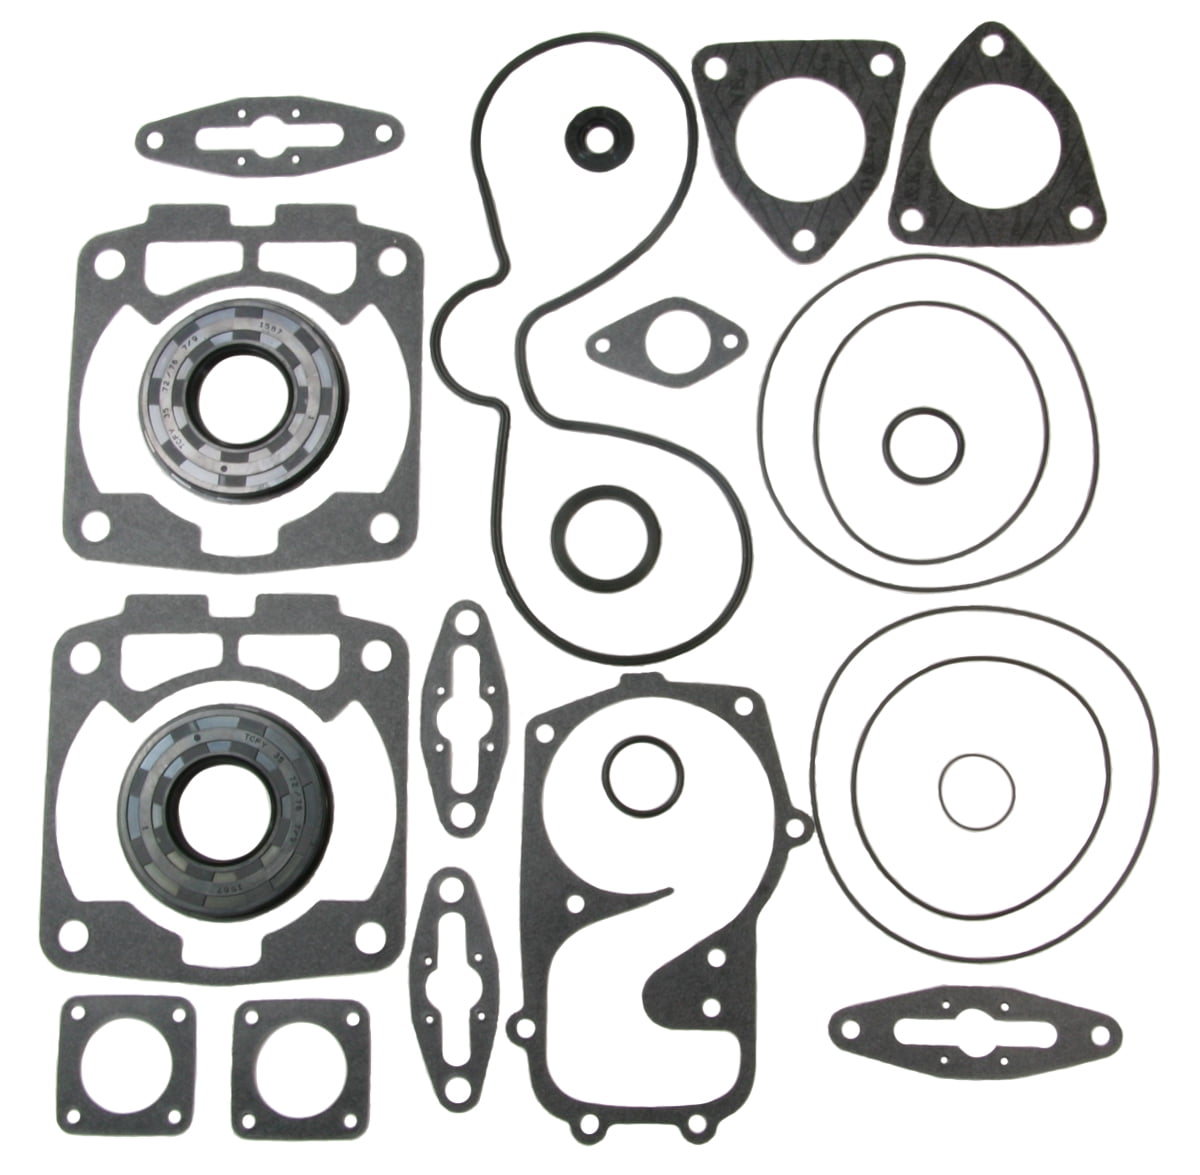 For Snowmobile Polaris 600 PRO X/600 Indy Touring Complete Gasket Kit 09-711251 